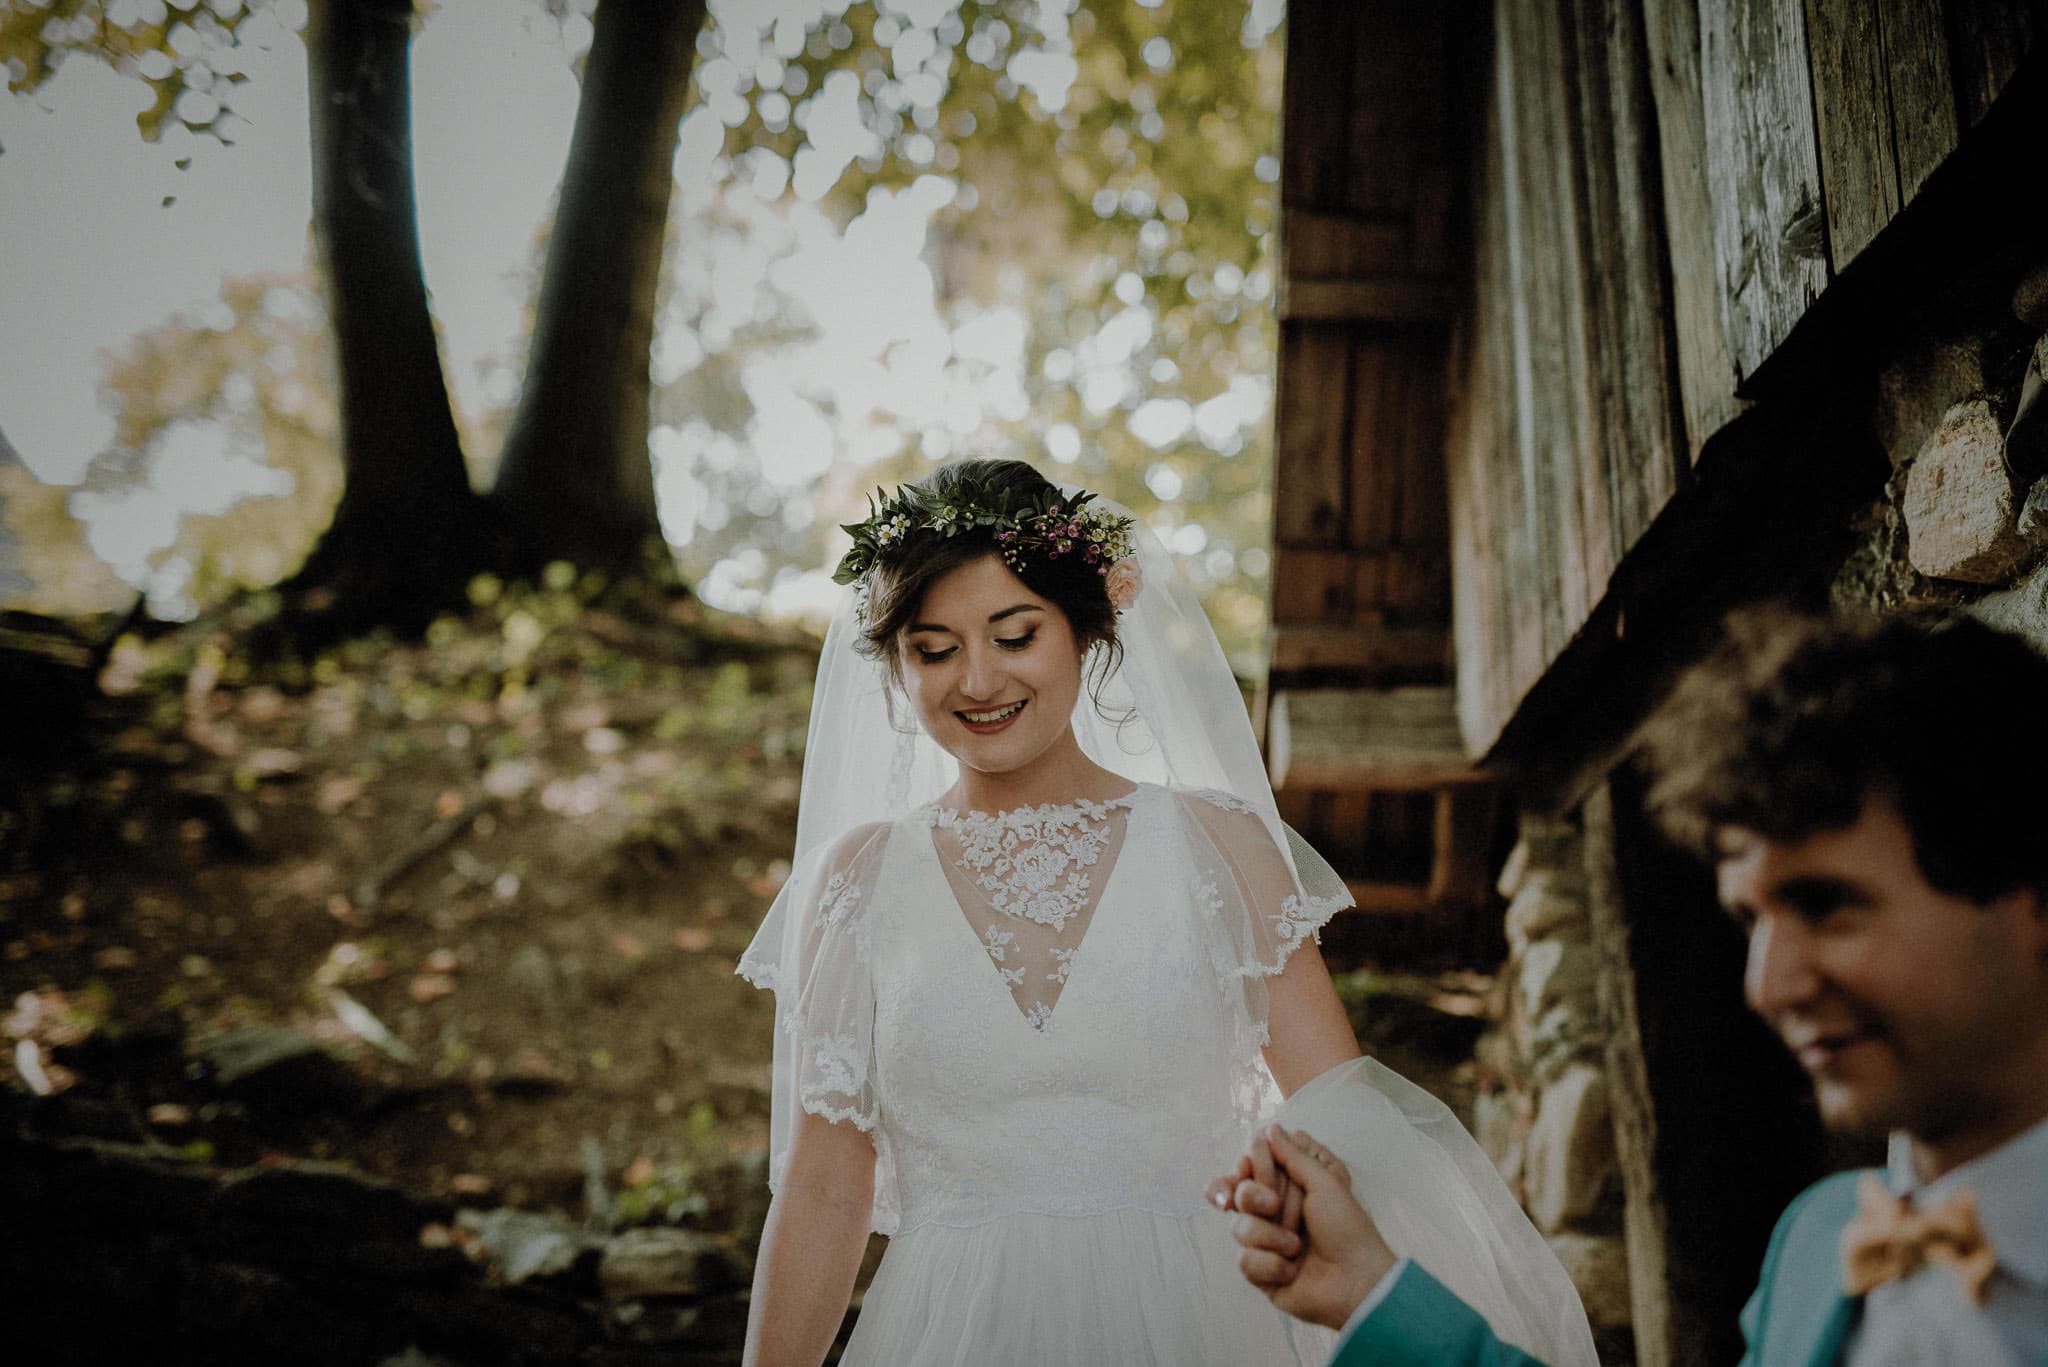 lighthearted bride on a sunny day